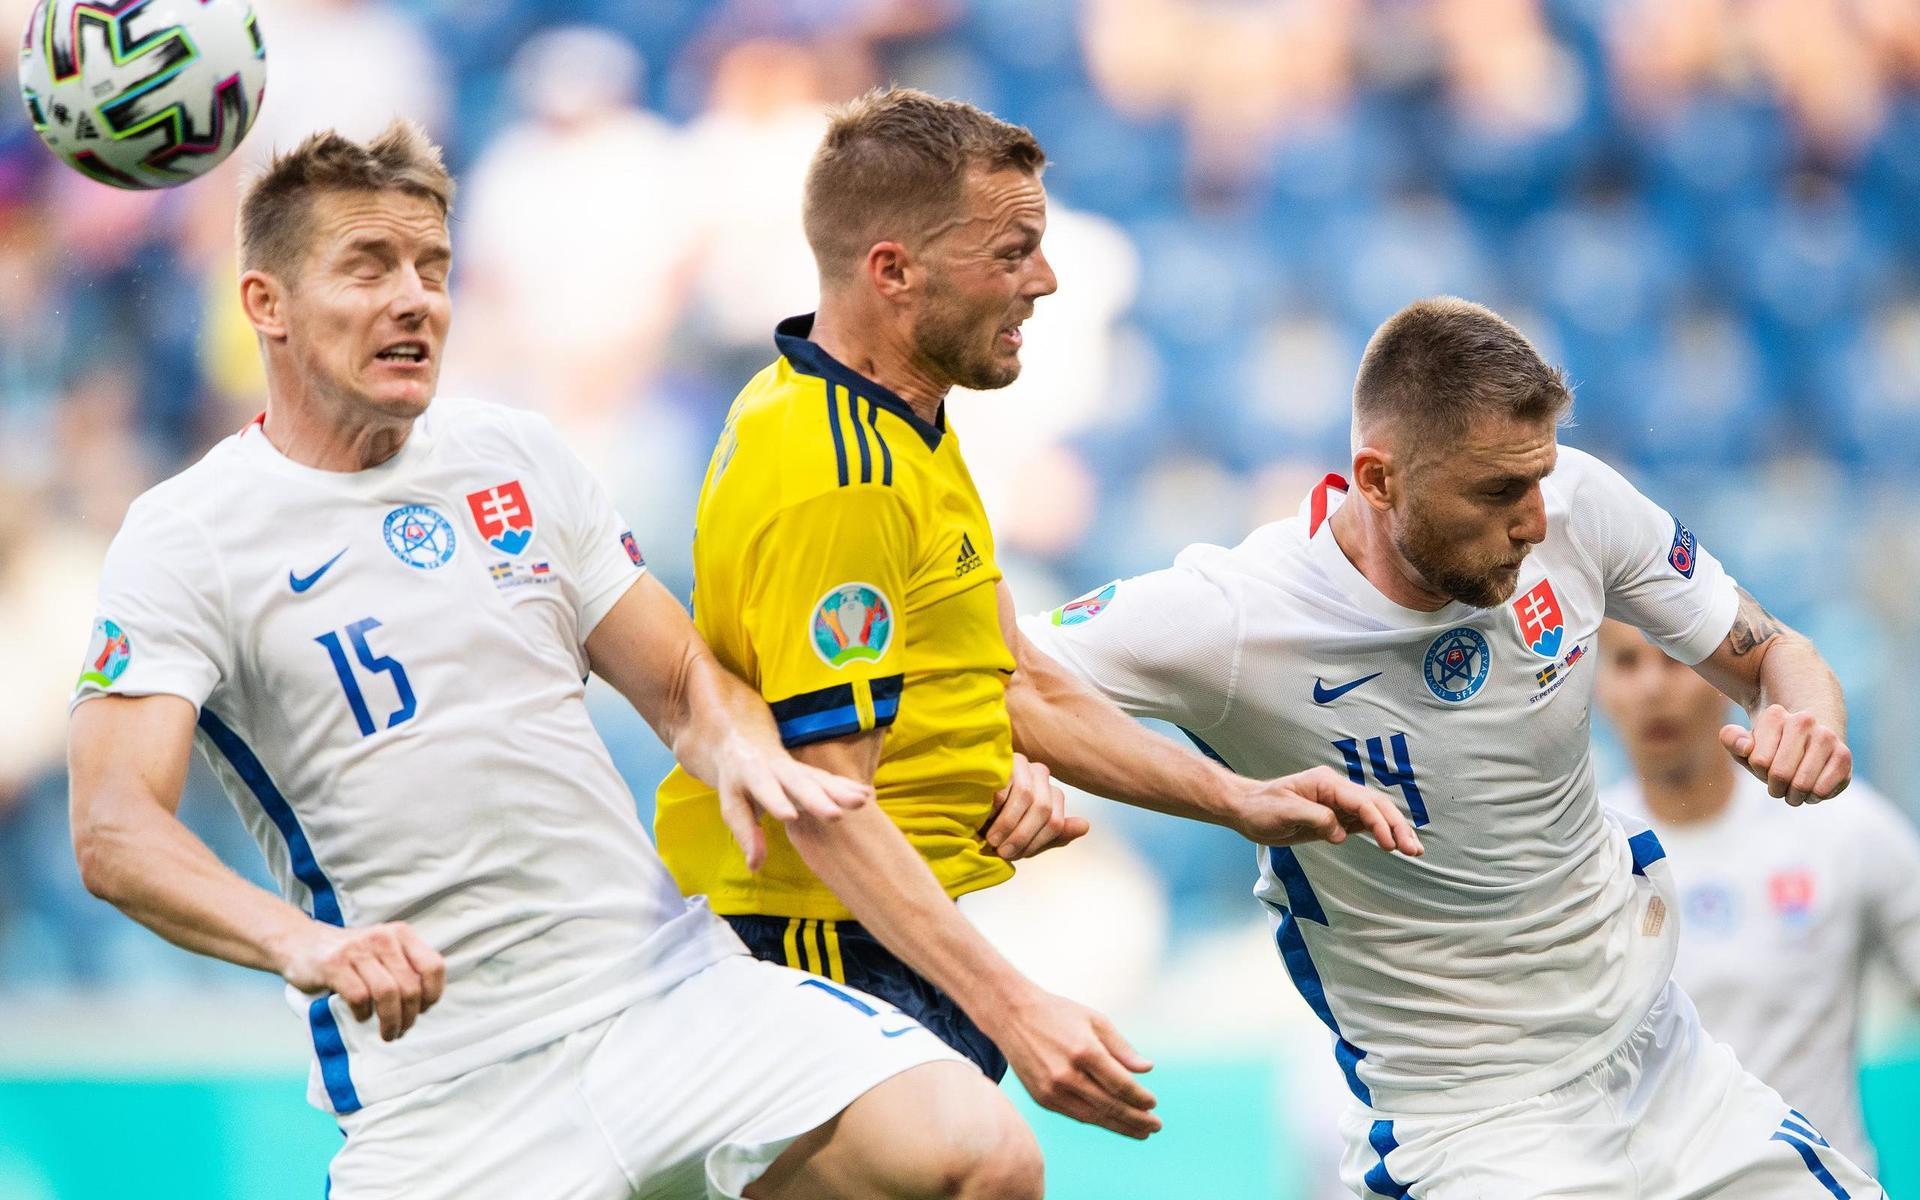 Tomas Hubocan and Milan Skriniar of Slovakia against Sebastian Larsson of Sweden during the UEFA Euro 2020 Football Championship match between Sweden and Slovakia on June 18, 2021 in Saint Petersburg. 